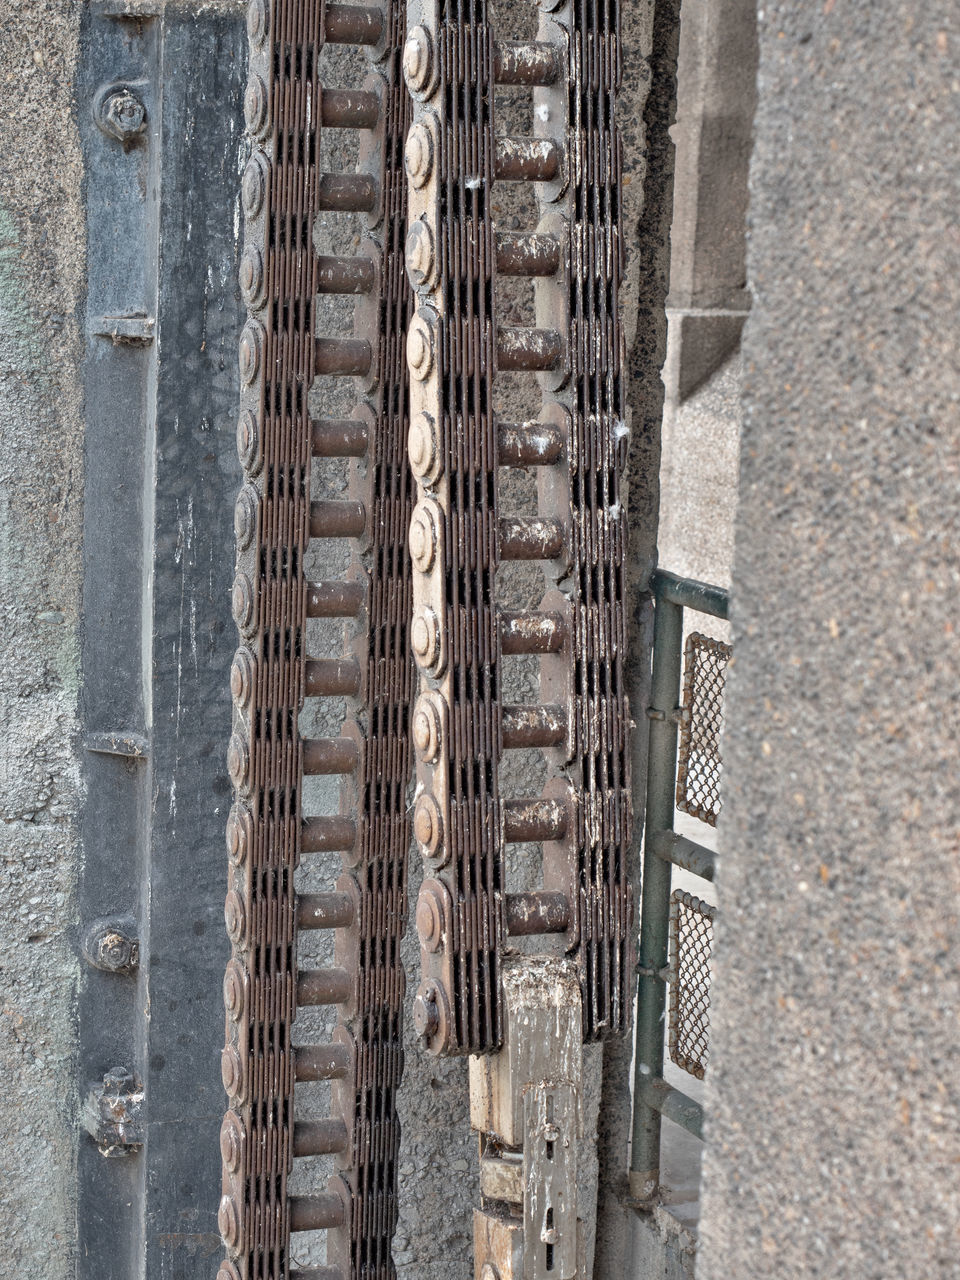 HIGH ANGLE VIEW OF METALLIC STRUCTURE ON STREET